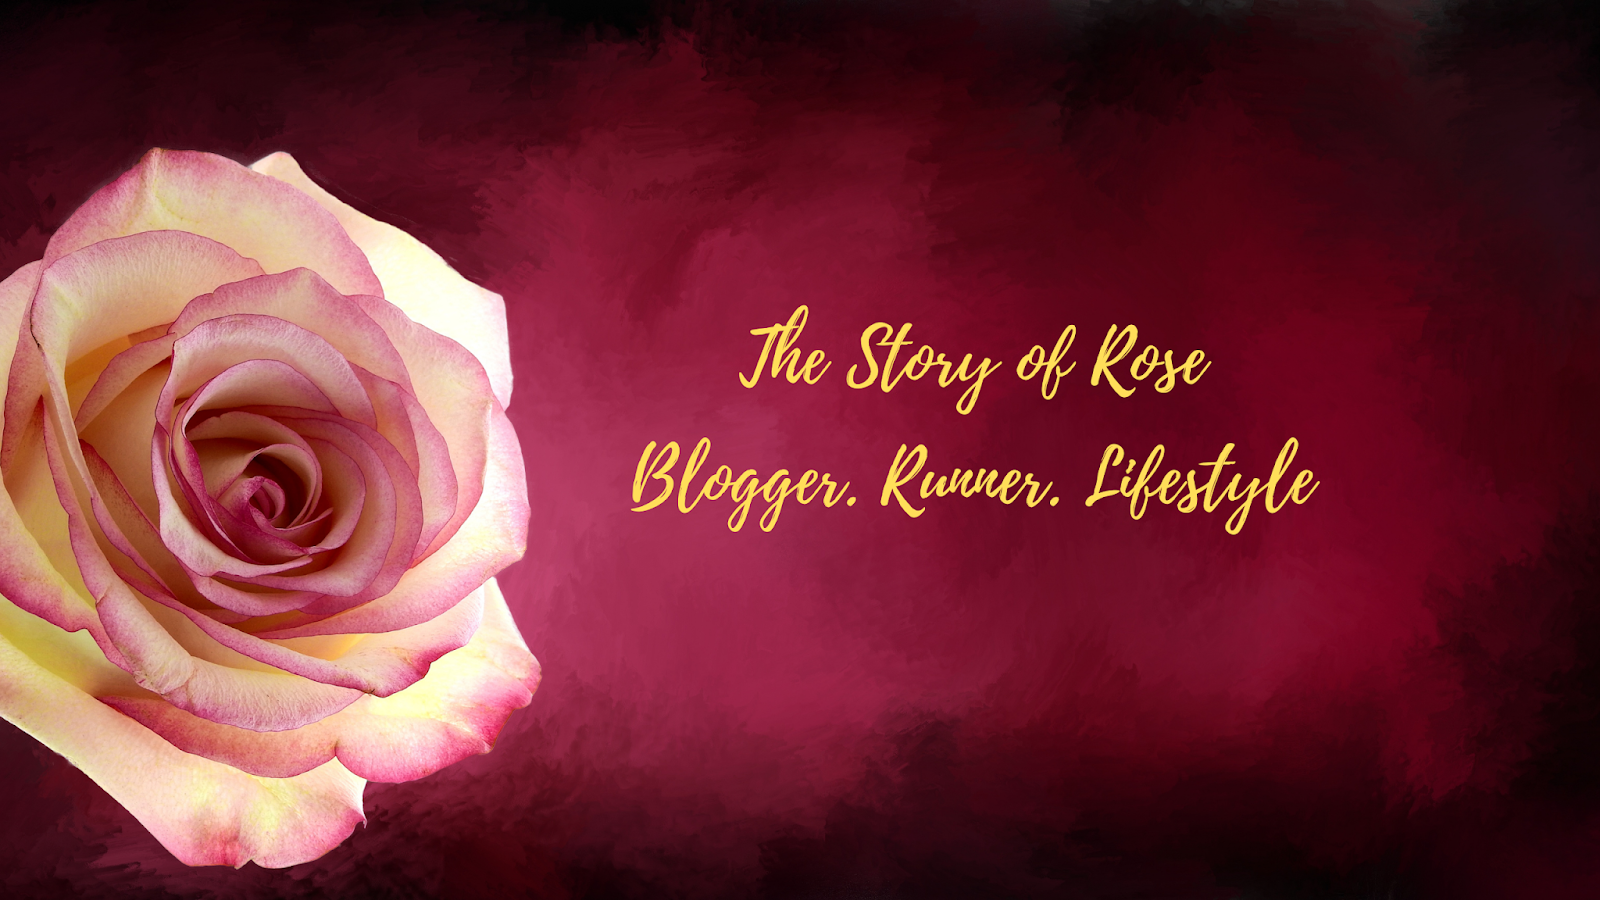 The Story of Rose